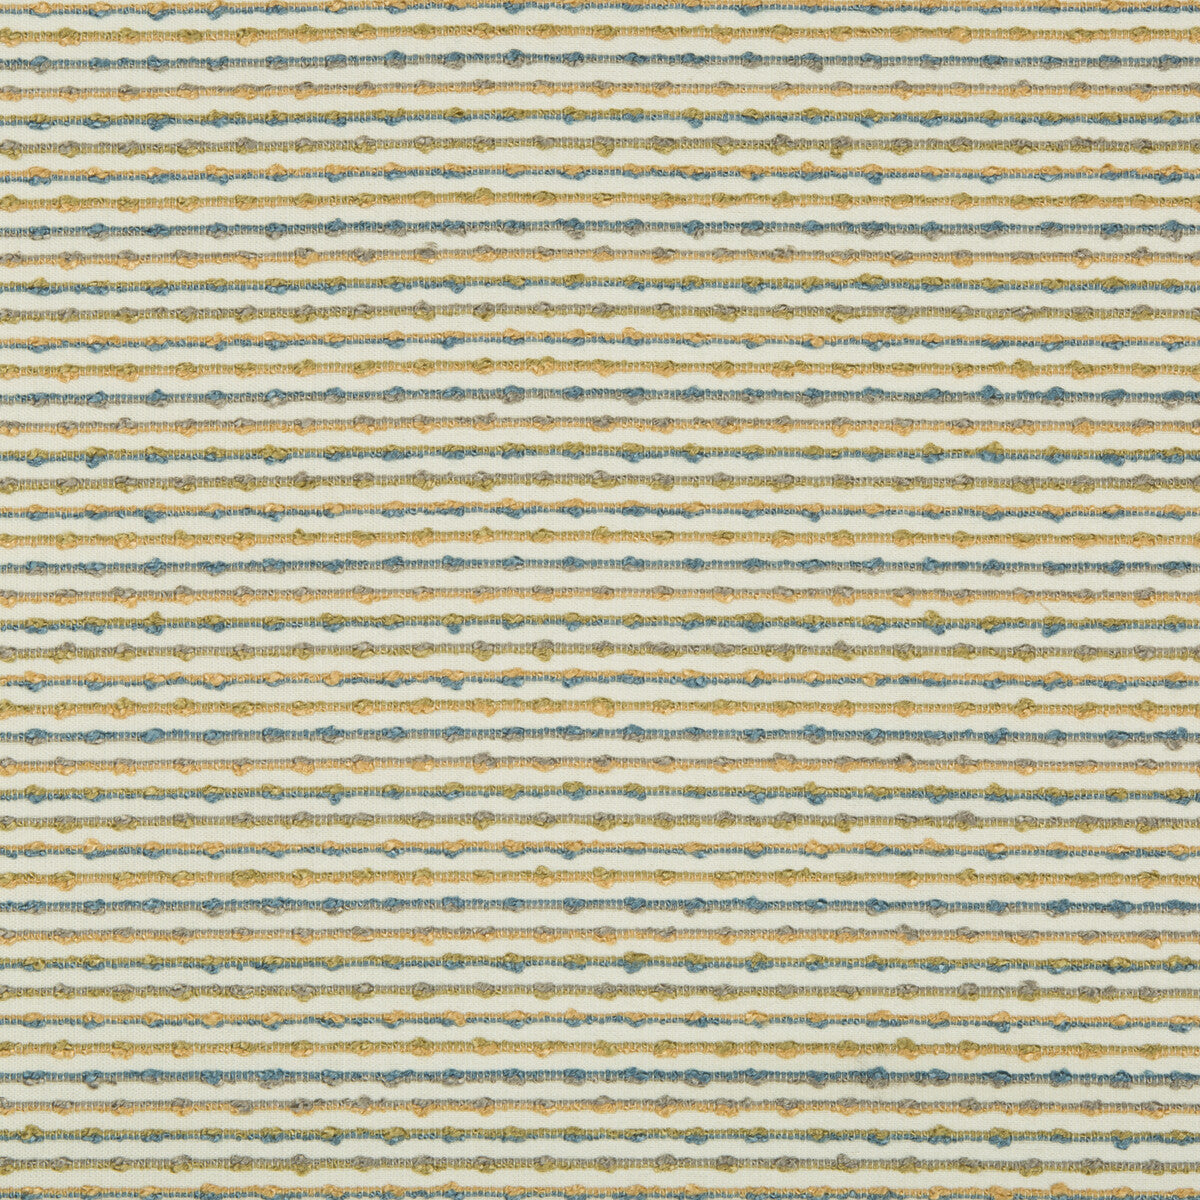 Kravet Contract fabric in 34747-516 color - pattern 34747.516.0 - by Kravet Contract in the Gis collection